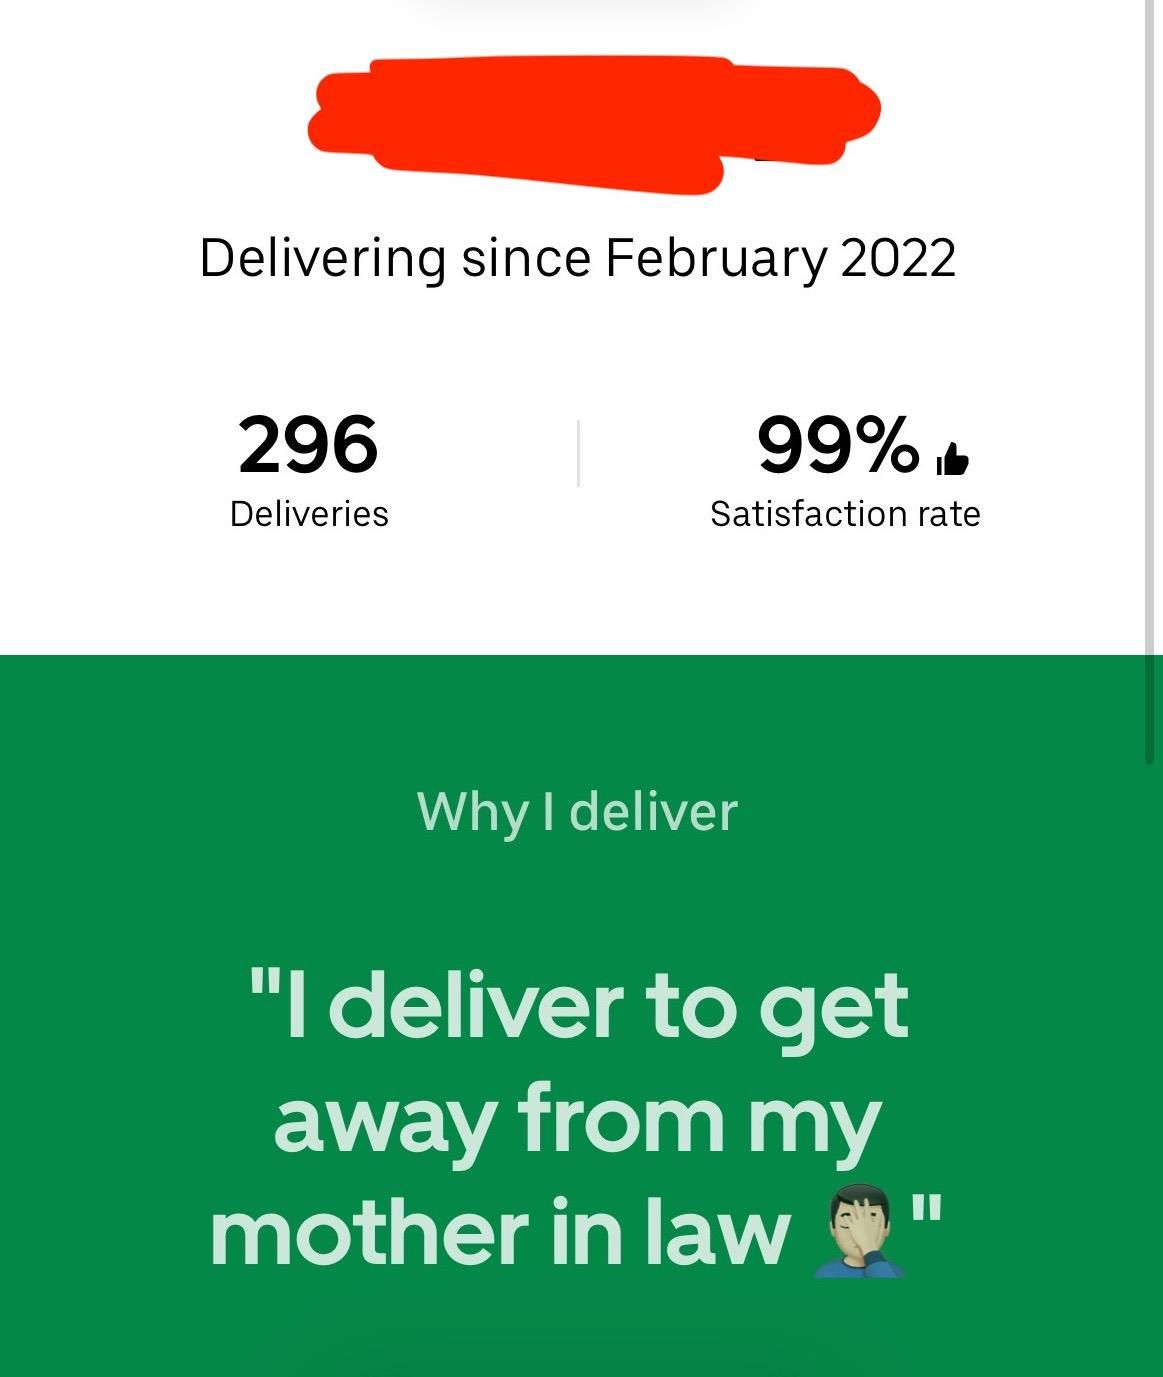 The reason why my UberEats courrier delivers food